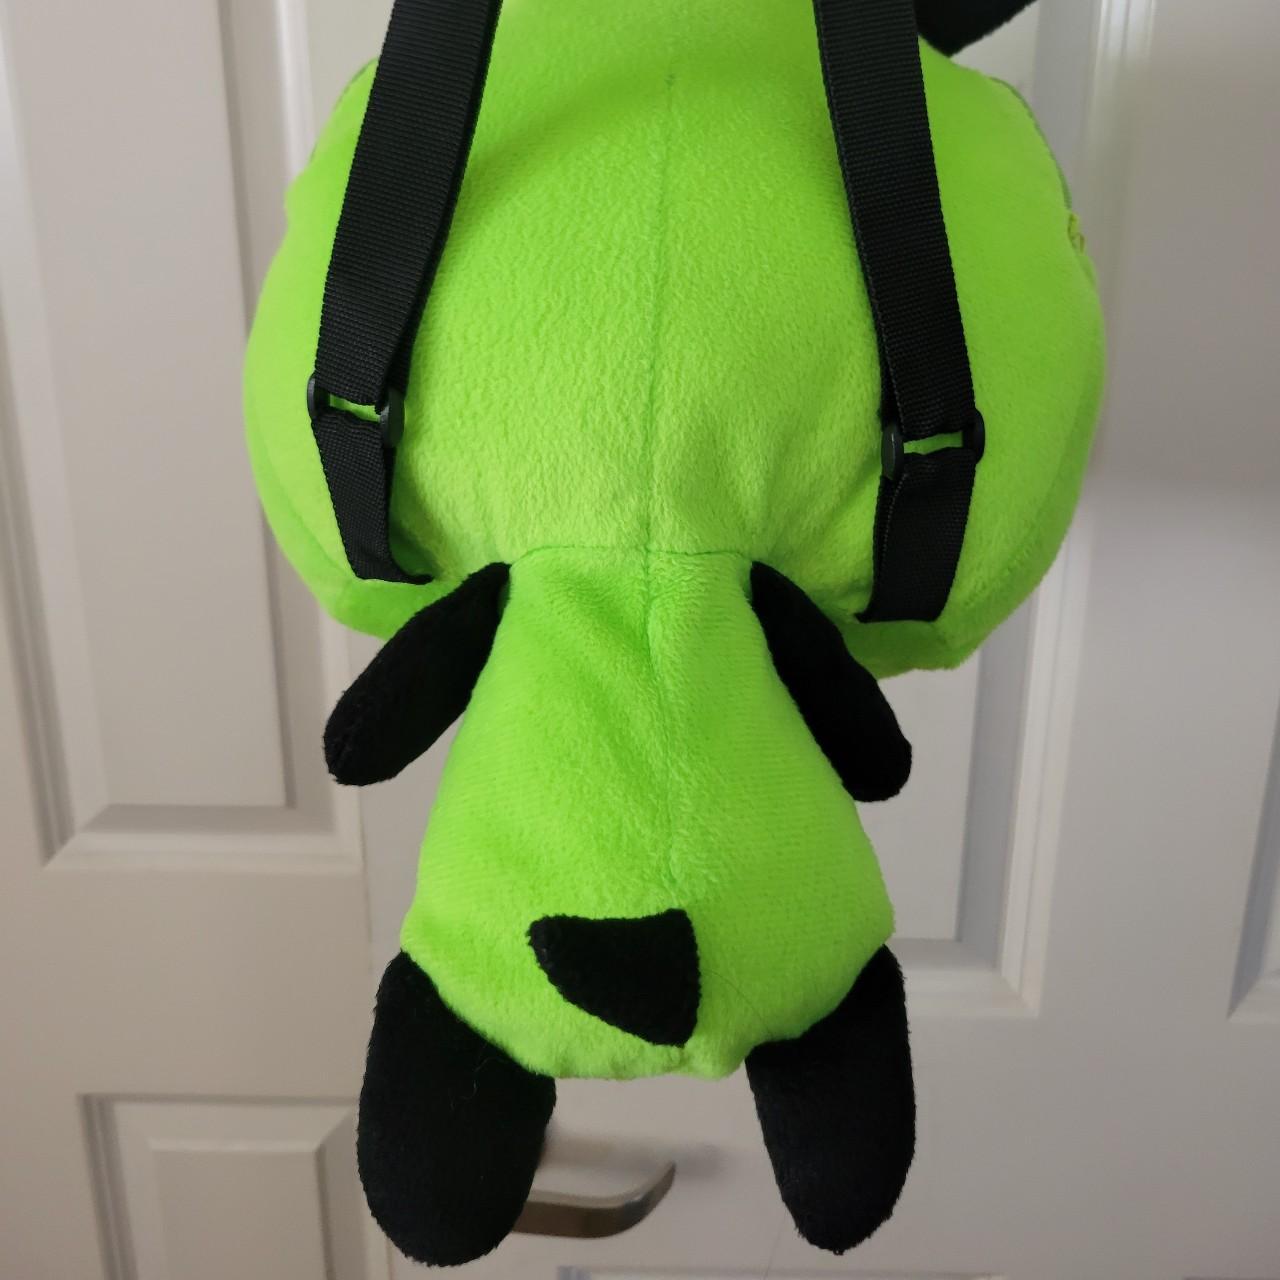 Hot Topic Black and Green Stuffed-animals (3)